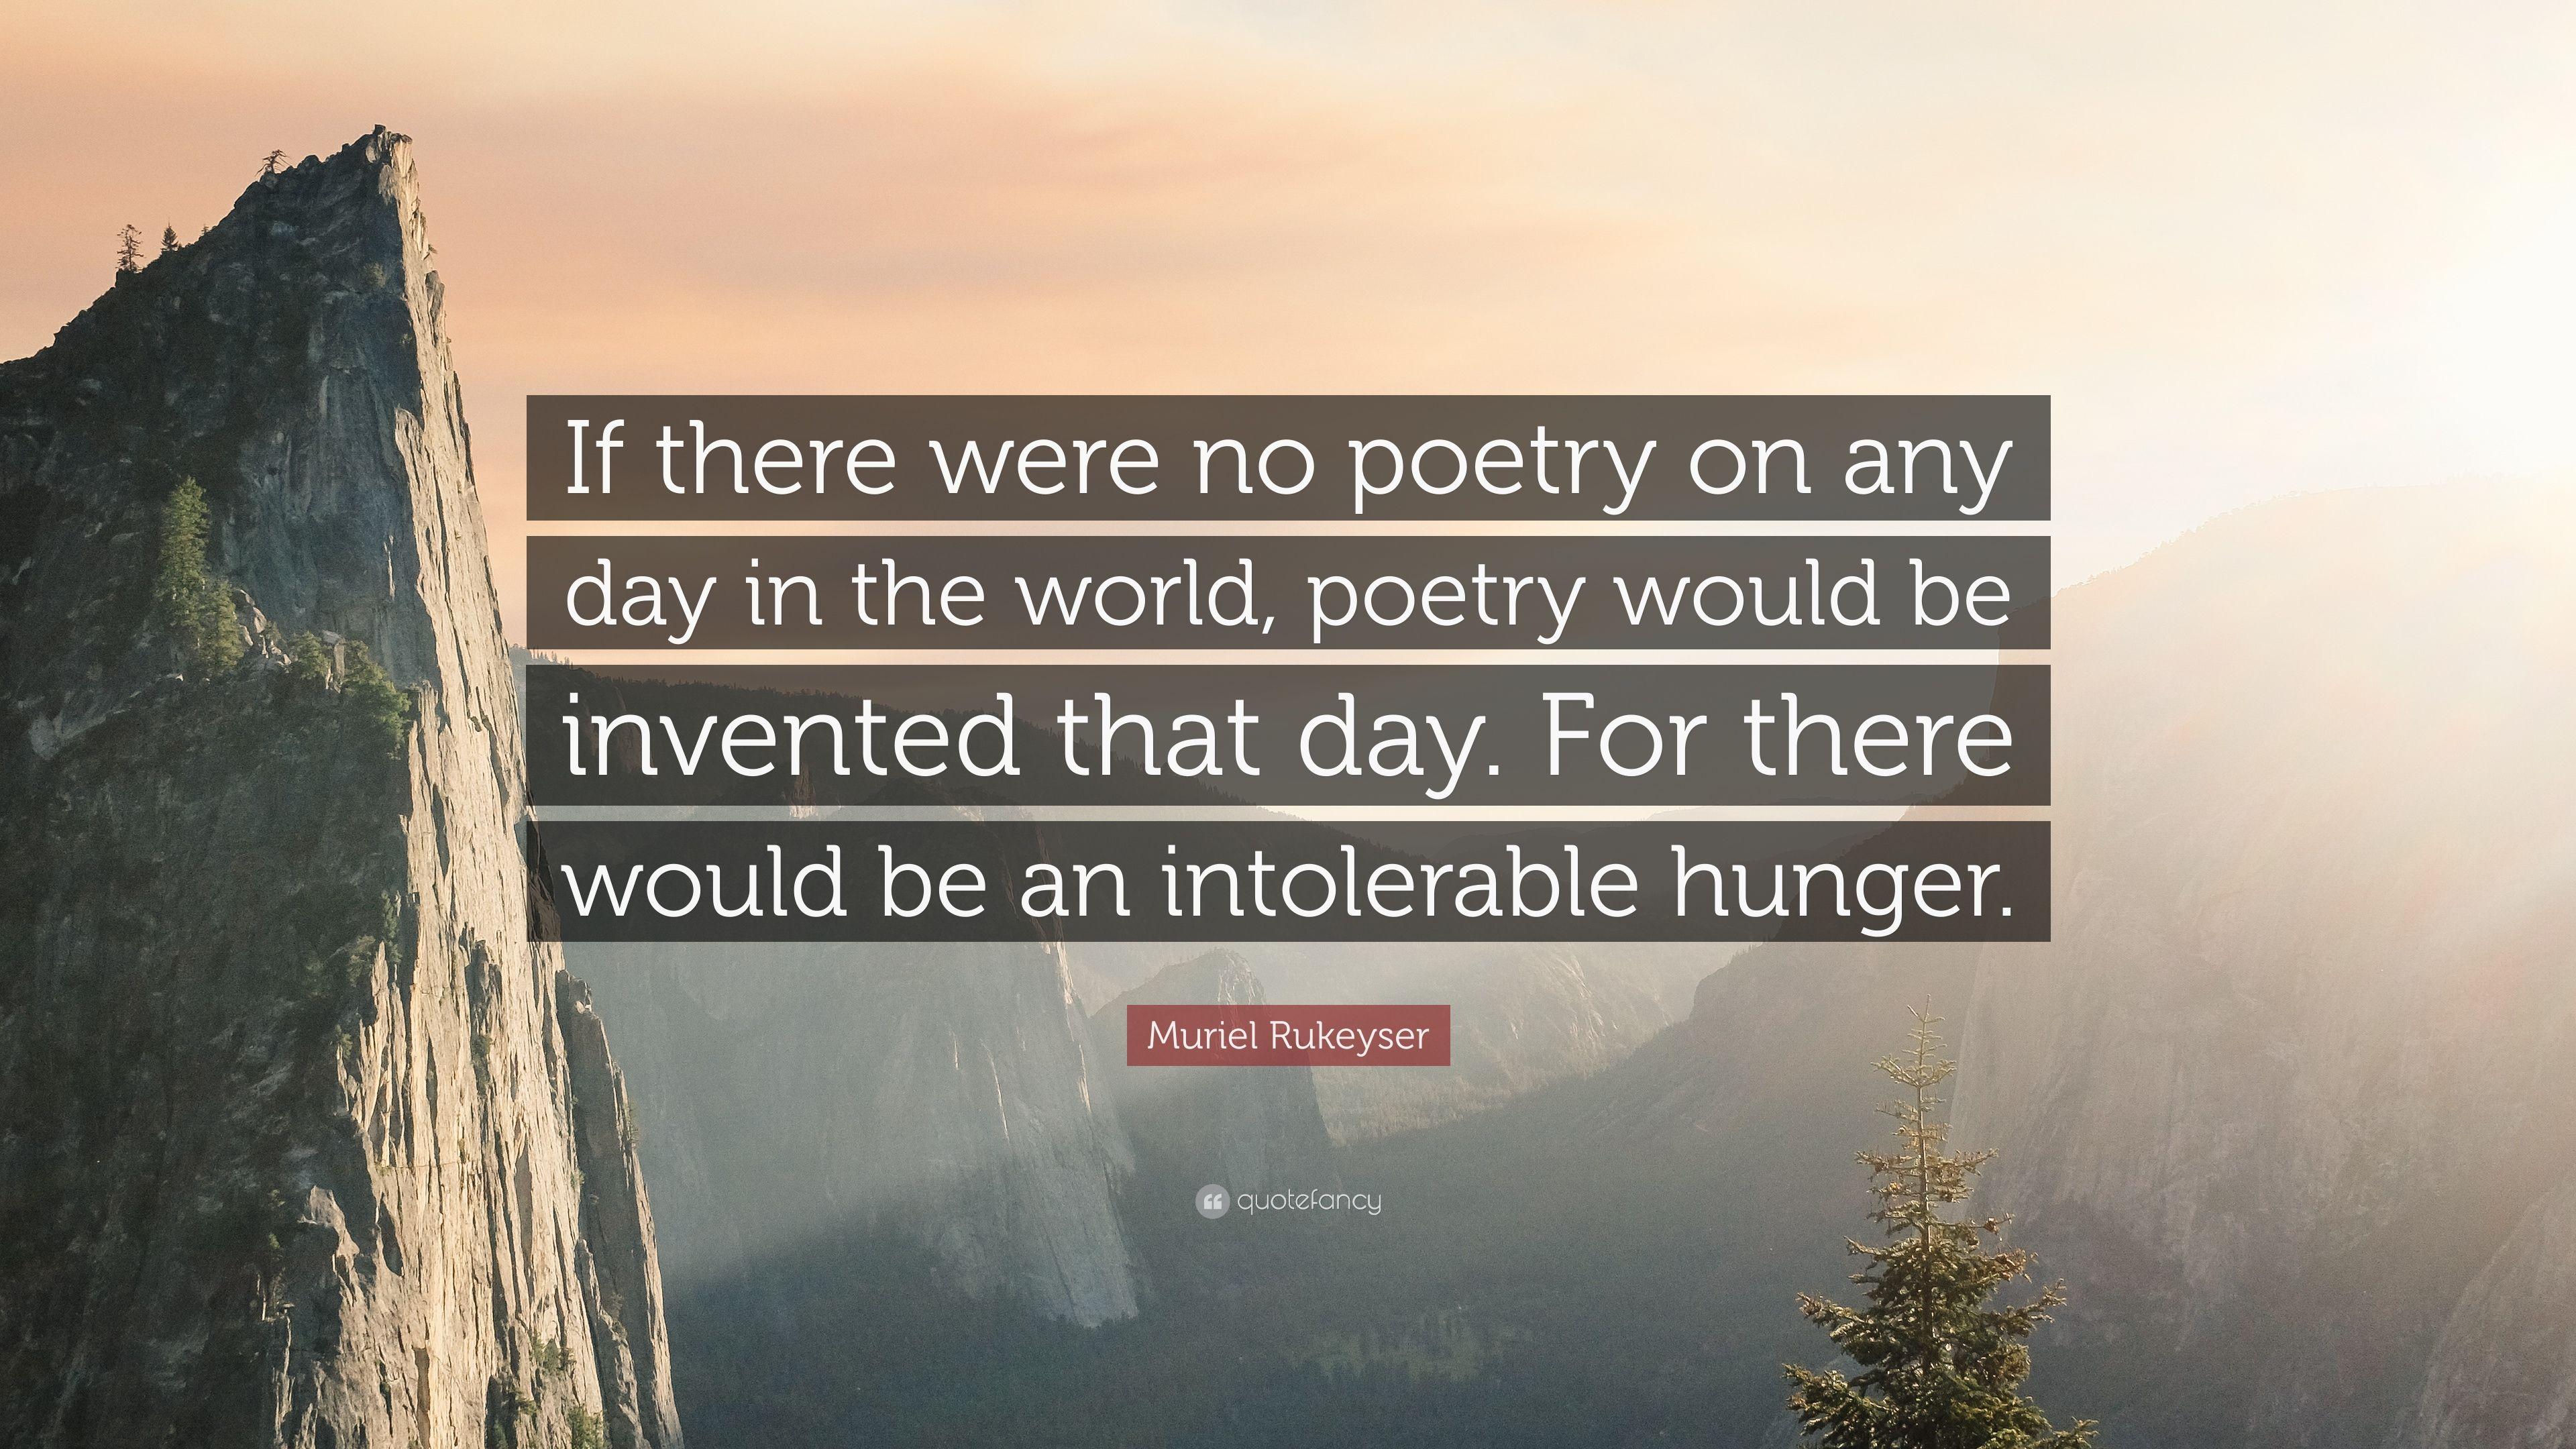 Muriel Rukeyser Quote: “If there were no poetry on any day in